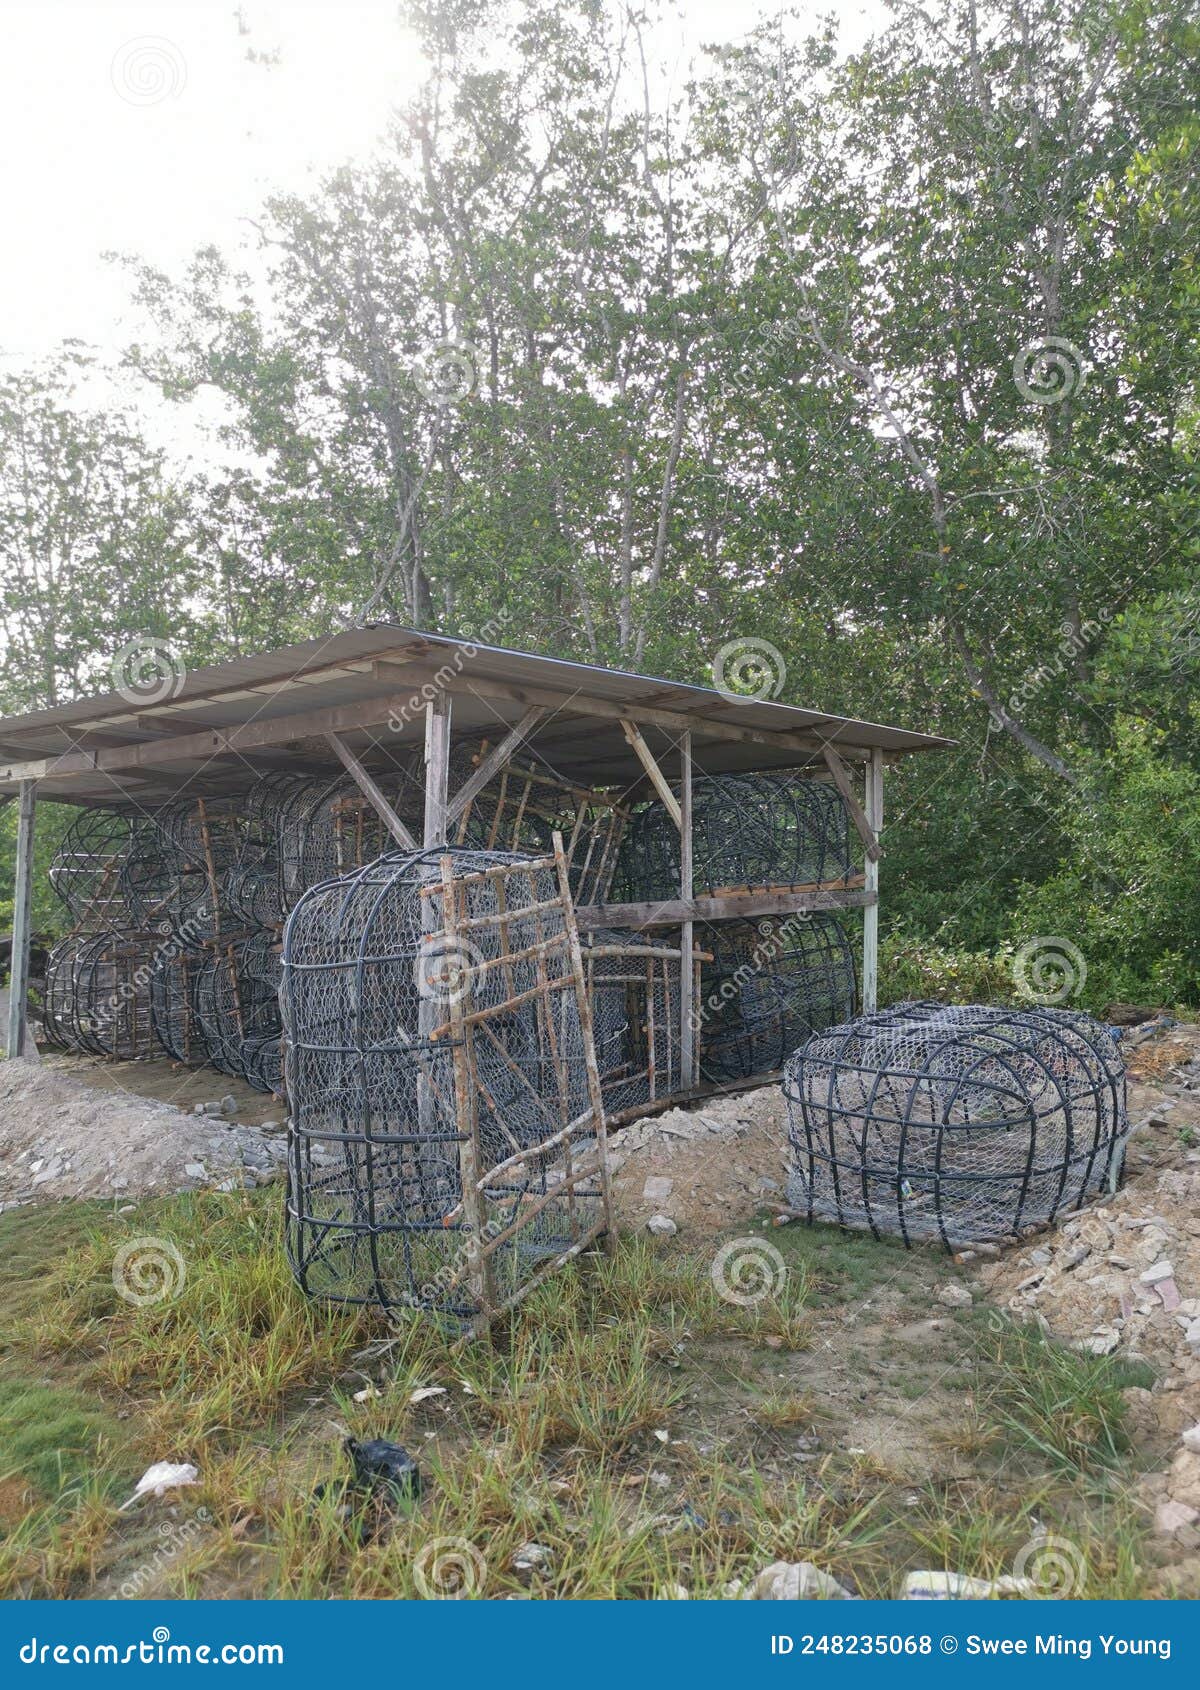 Outdoor Scene of the DIY Fish Trap Structure Make from Mangrove